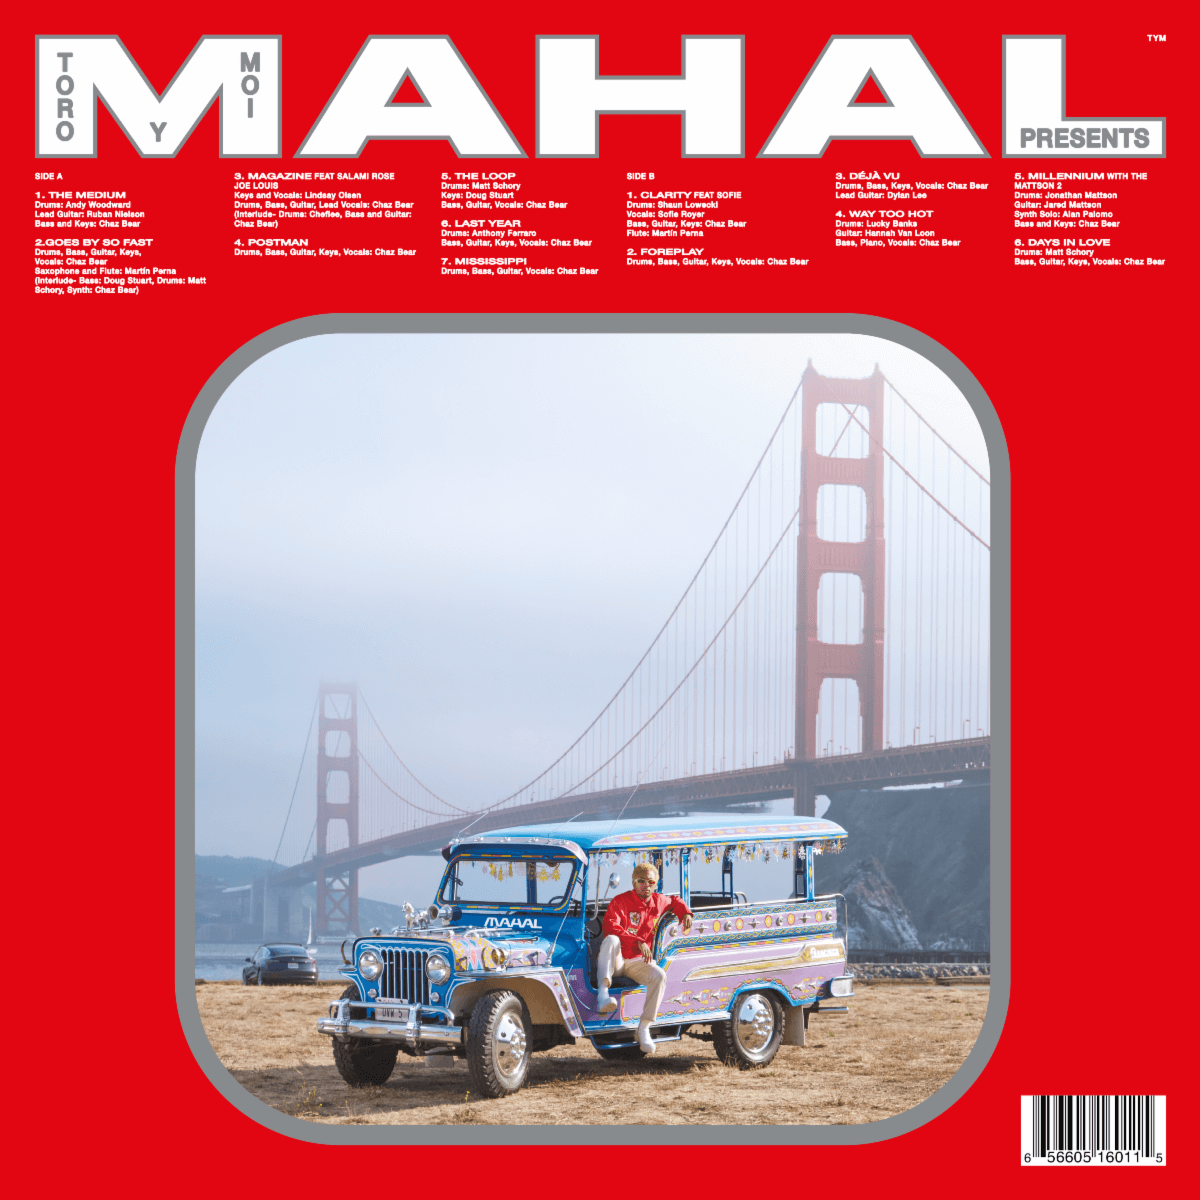 MAHAL by Toro y Moi album review by Stephan Boissonneault. The full-length is now available via Dead Ocean and streaming services